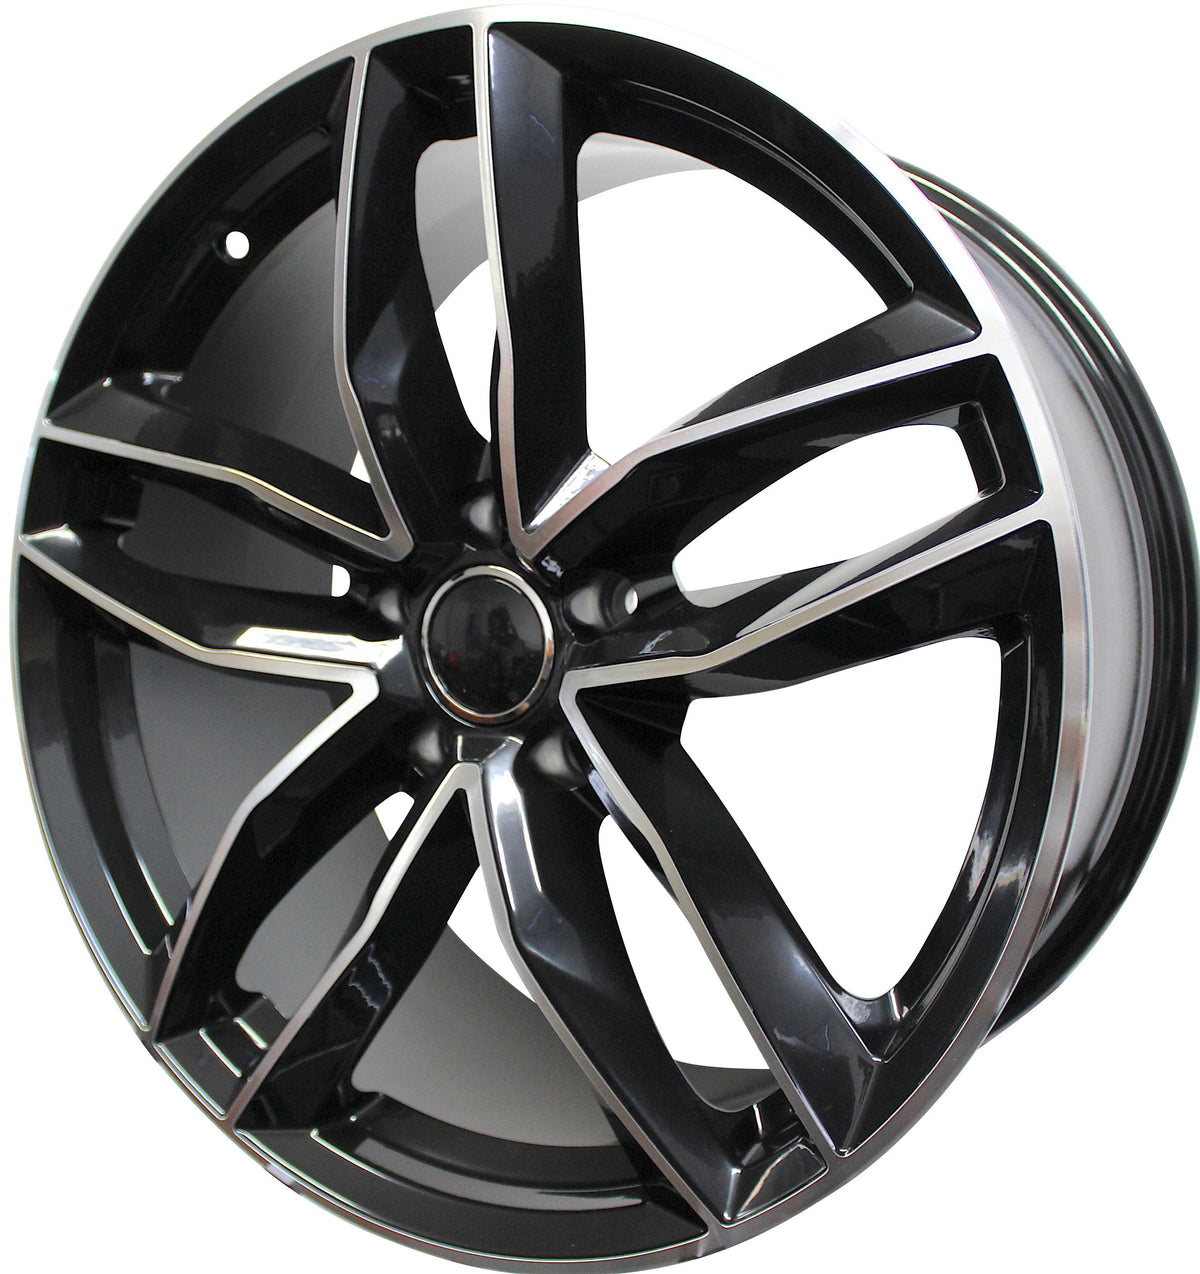 17" inch Audi black machined face wheels Front